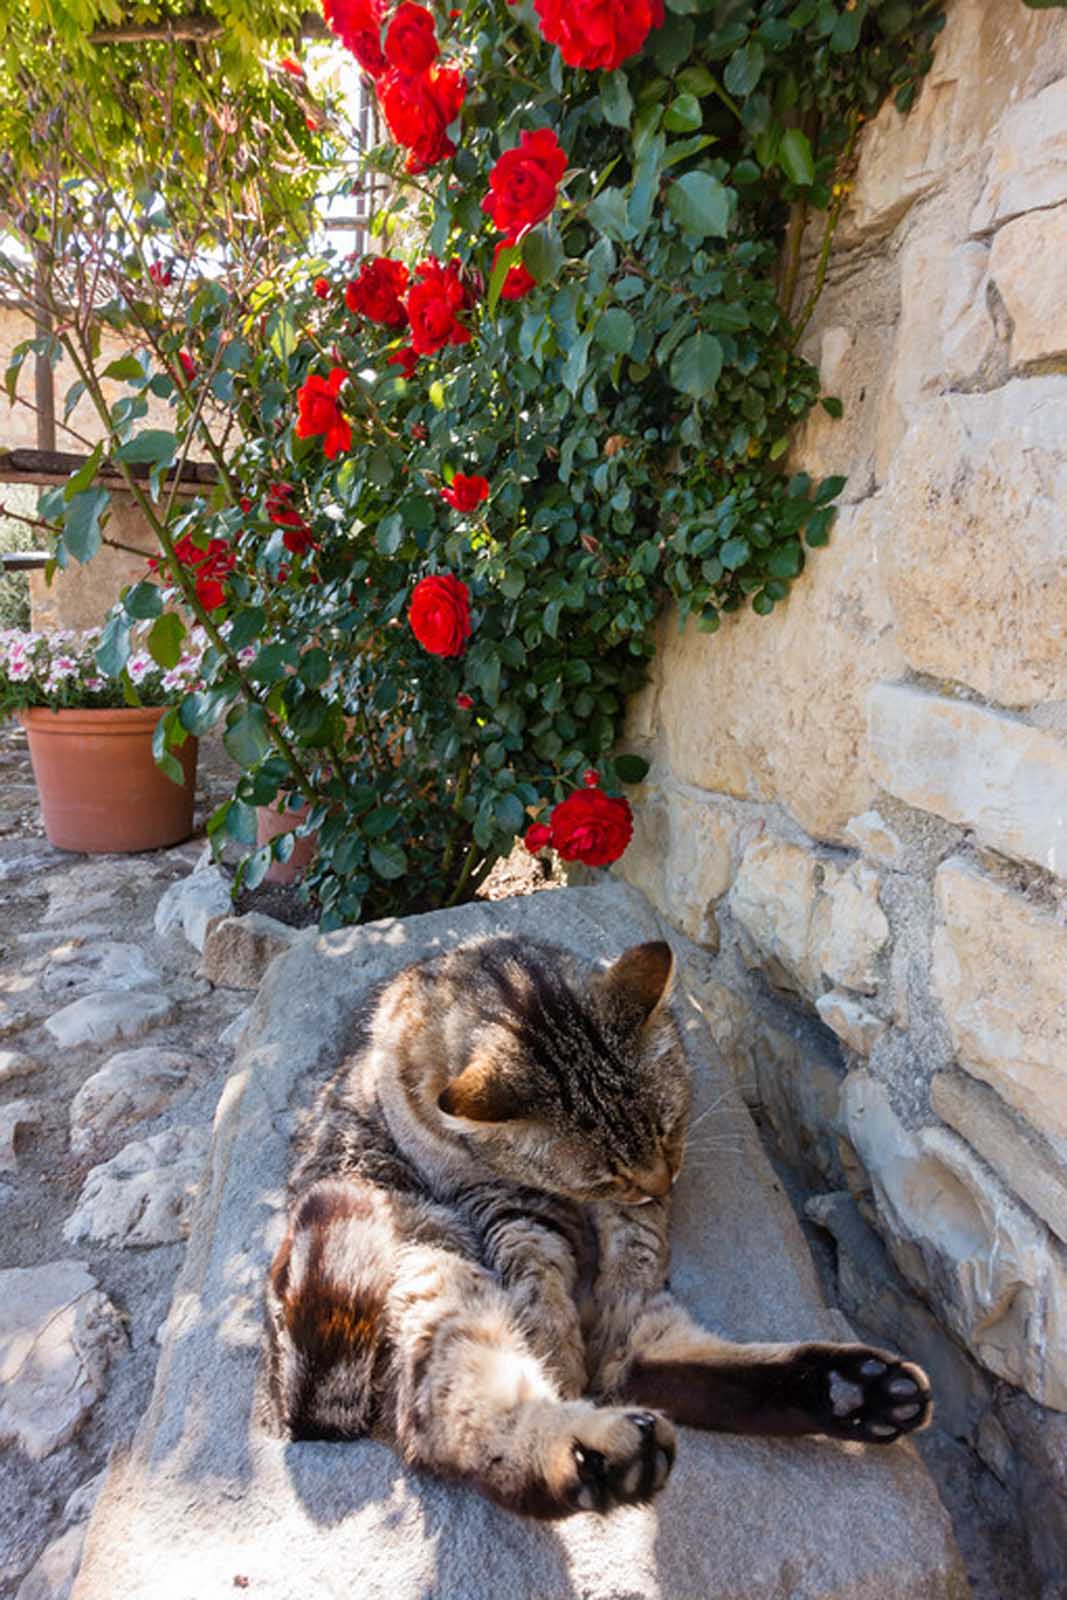 cat with flowers in tuscany villages of italy